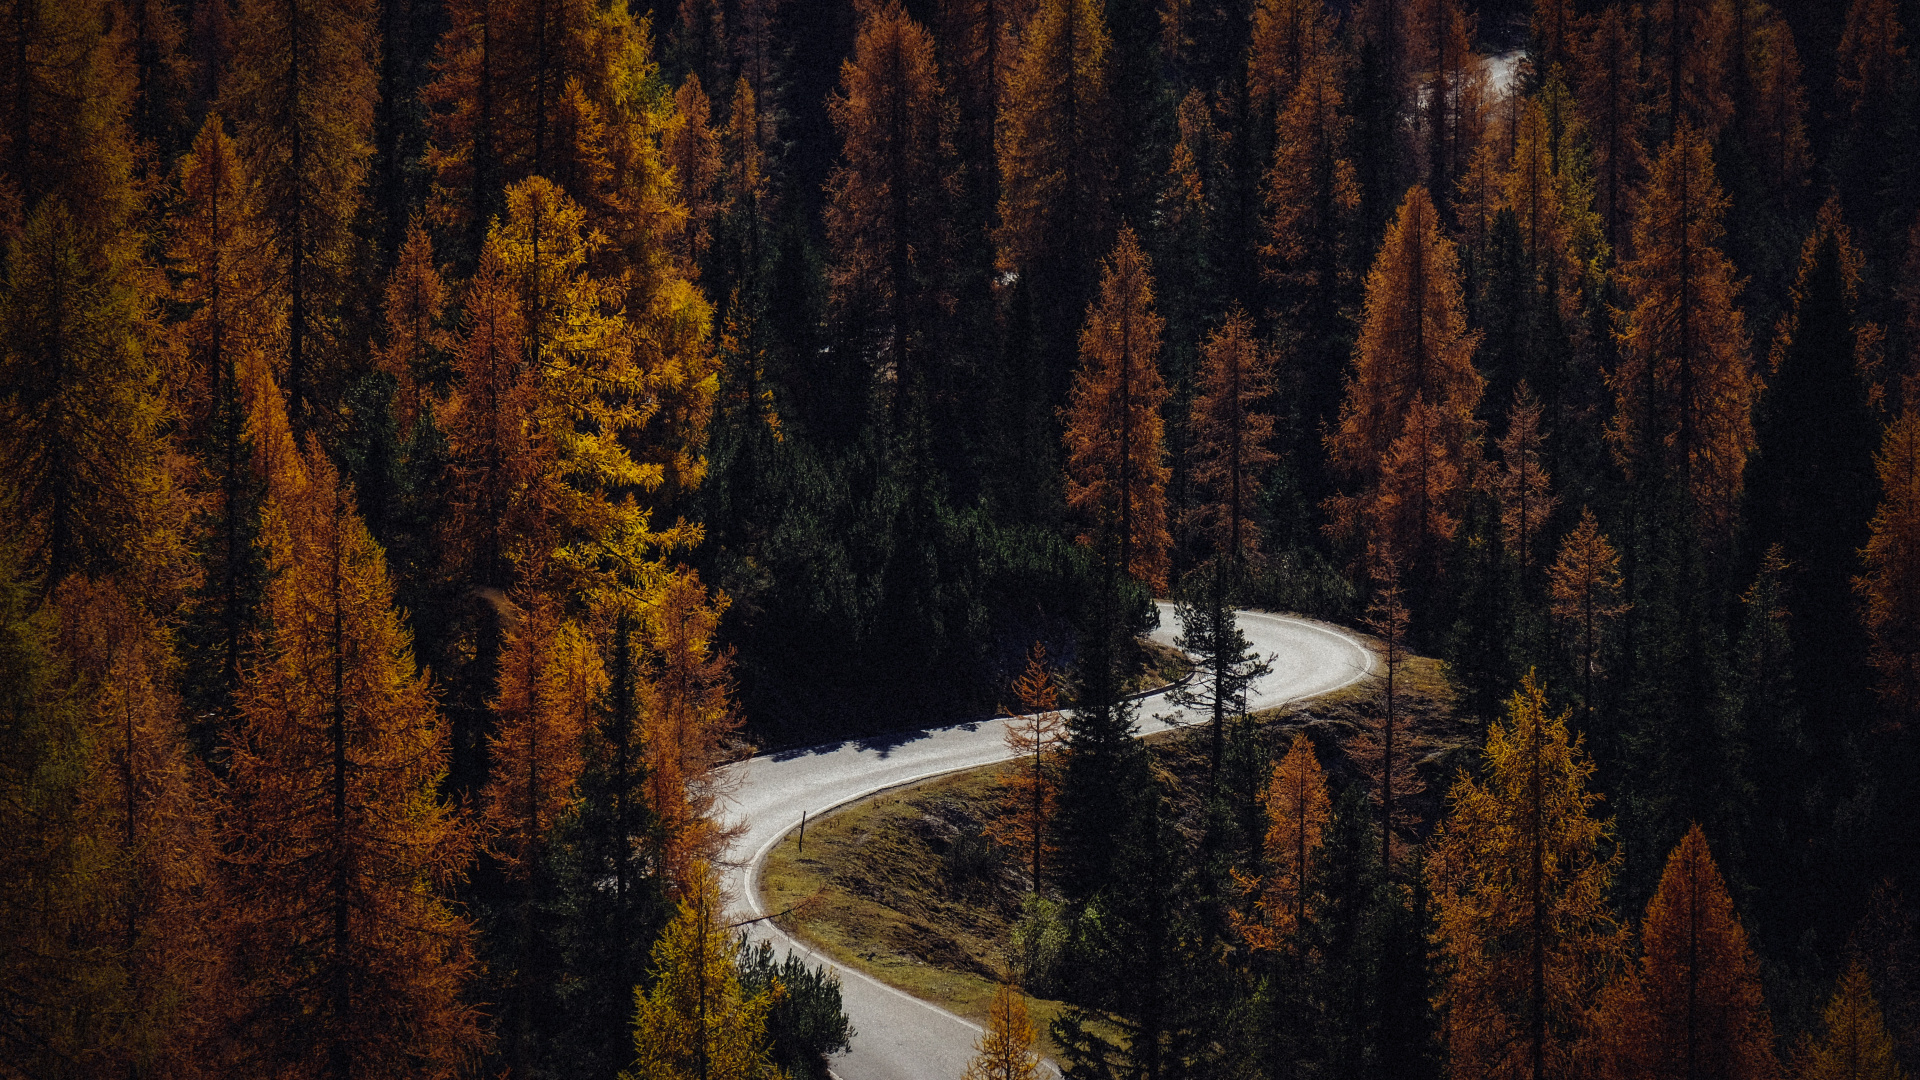 Download Autumn, road, turns, forest, nature wallpaper, 1920x Full HD, HDTV, FHD, 1080p